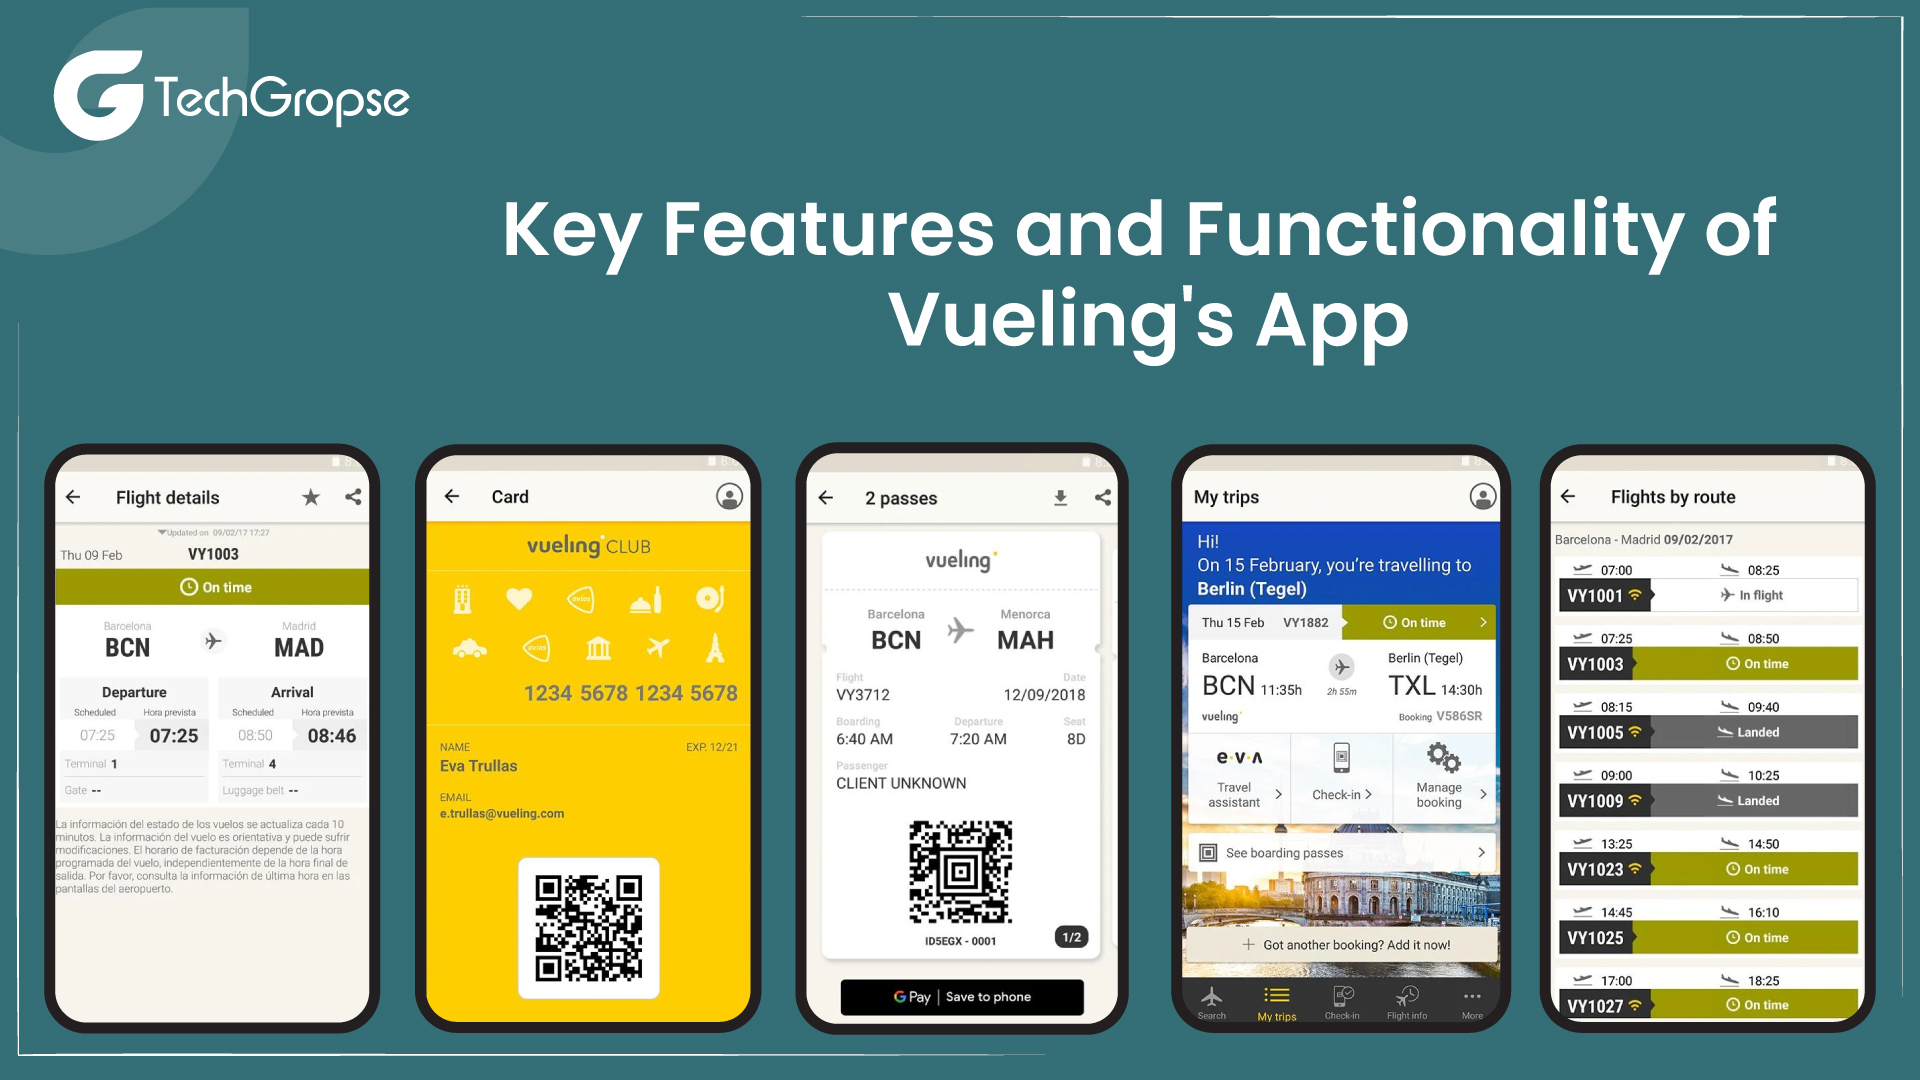 Understanding the Key Features and Functionality of Vueling's App